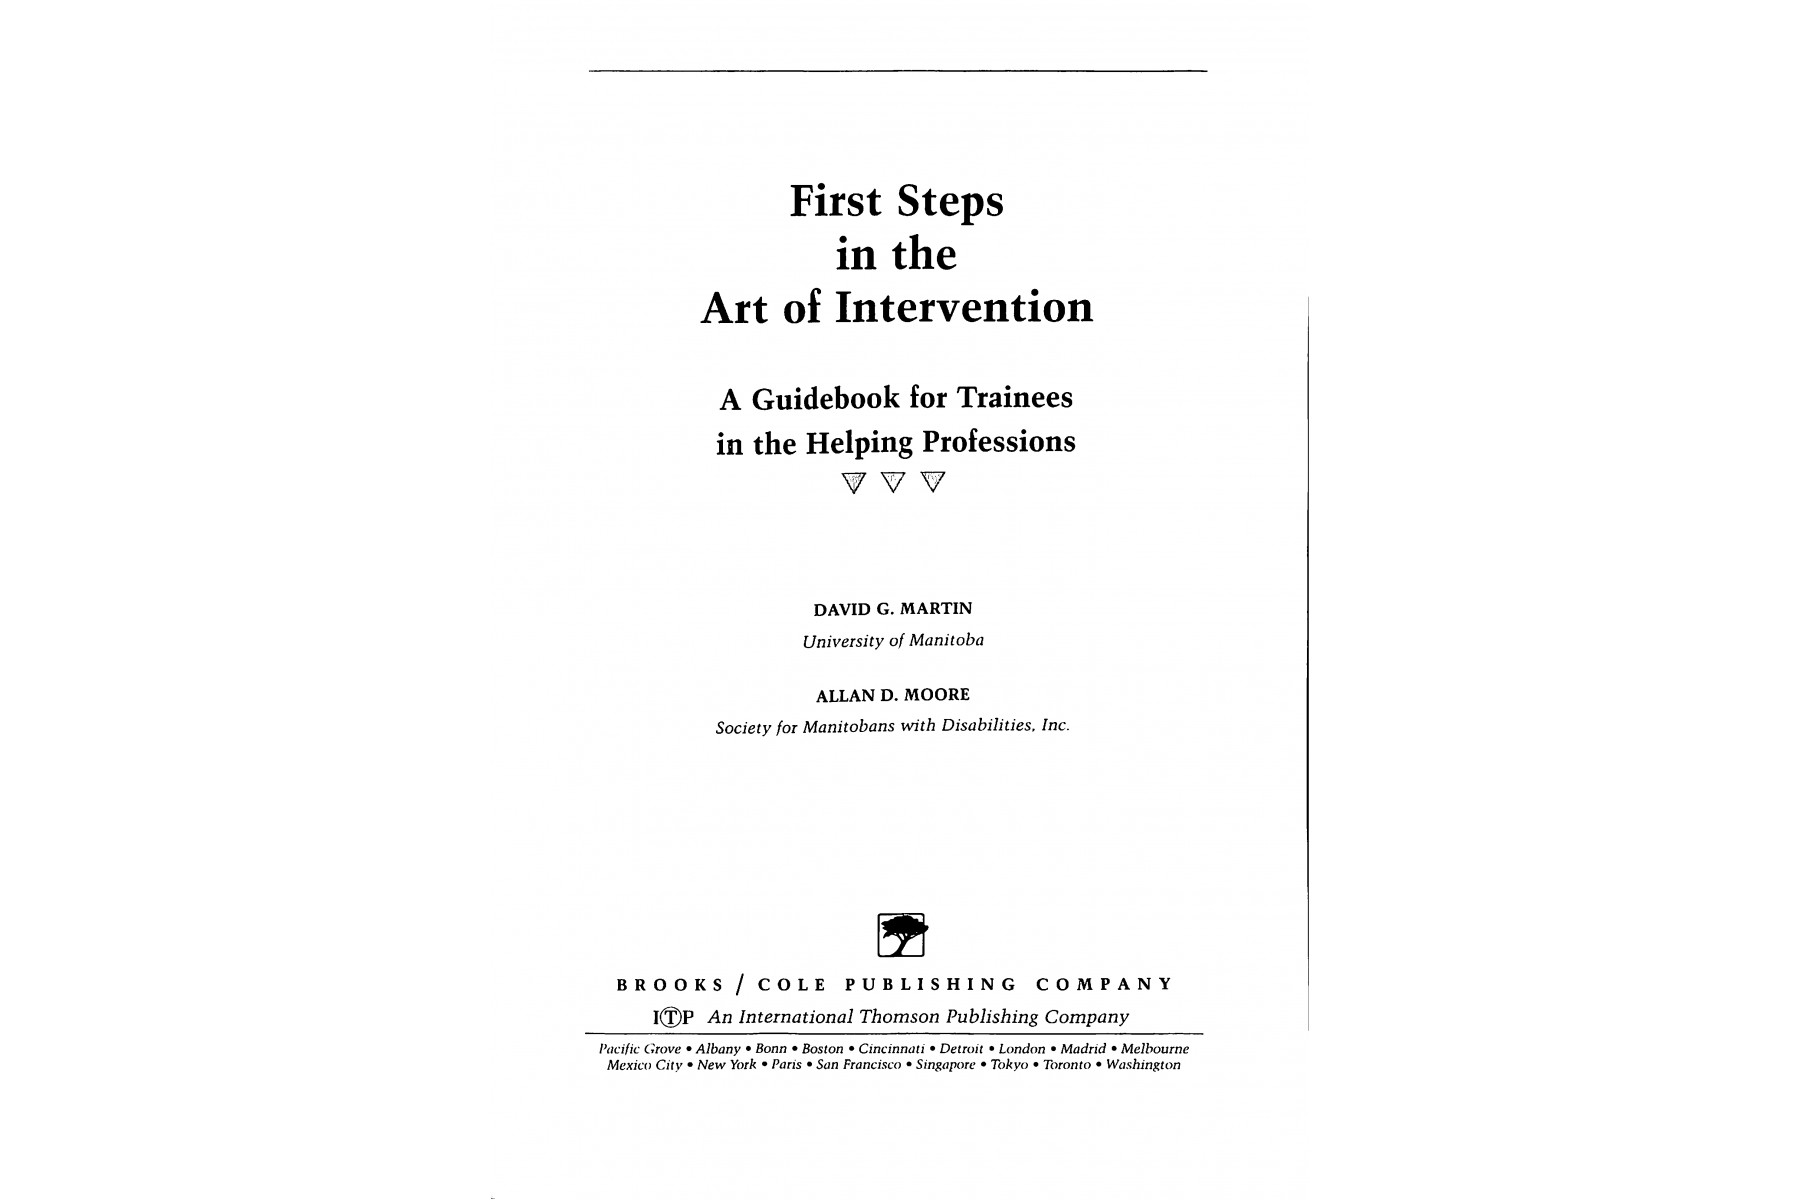 First Steps in the Art of Intervention: A Guidebook for Trainees in the Helping Professions